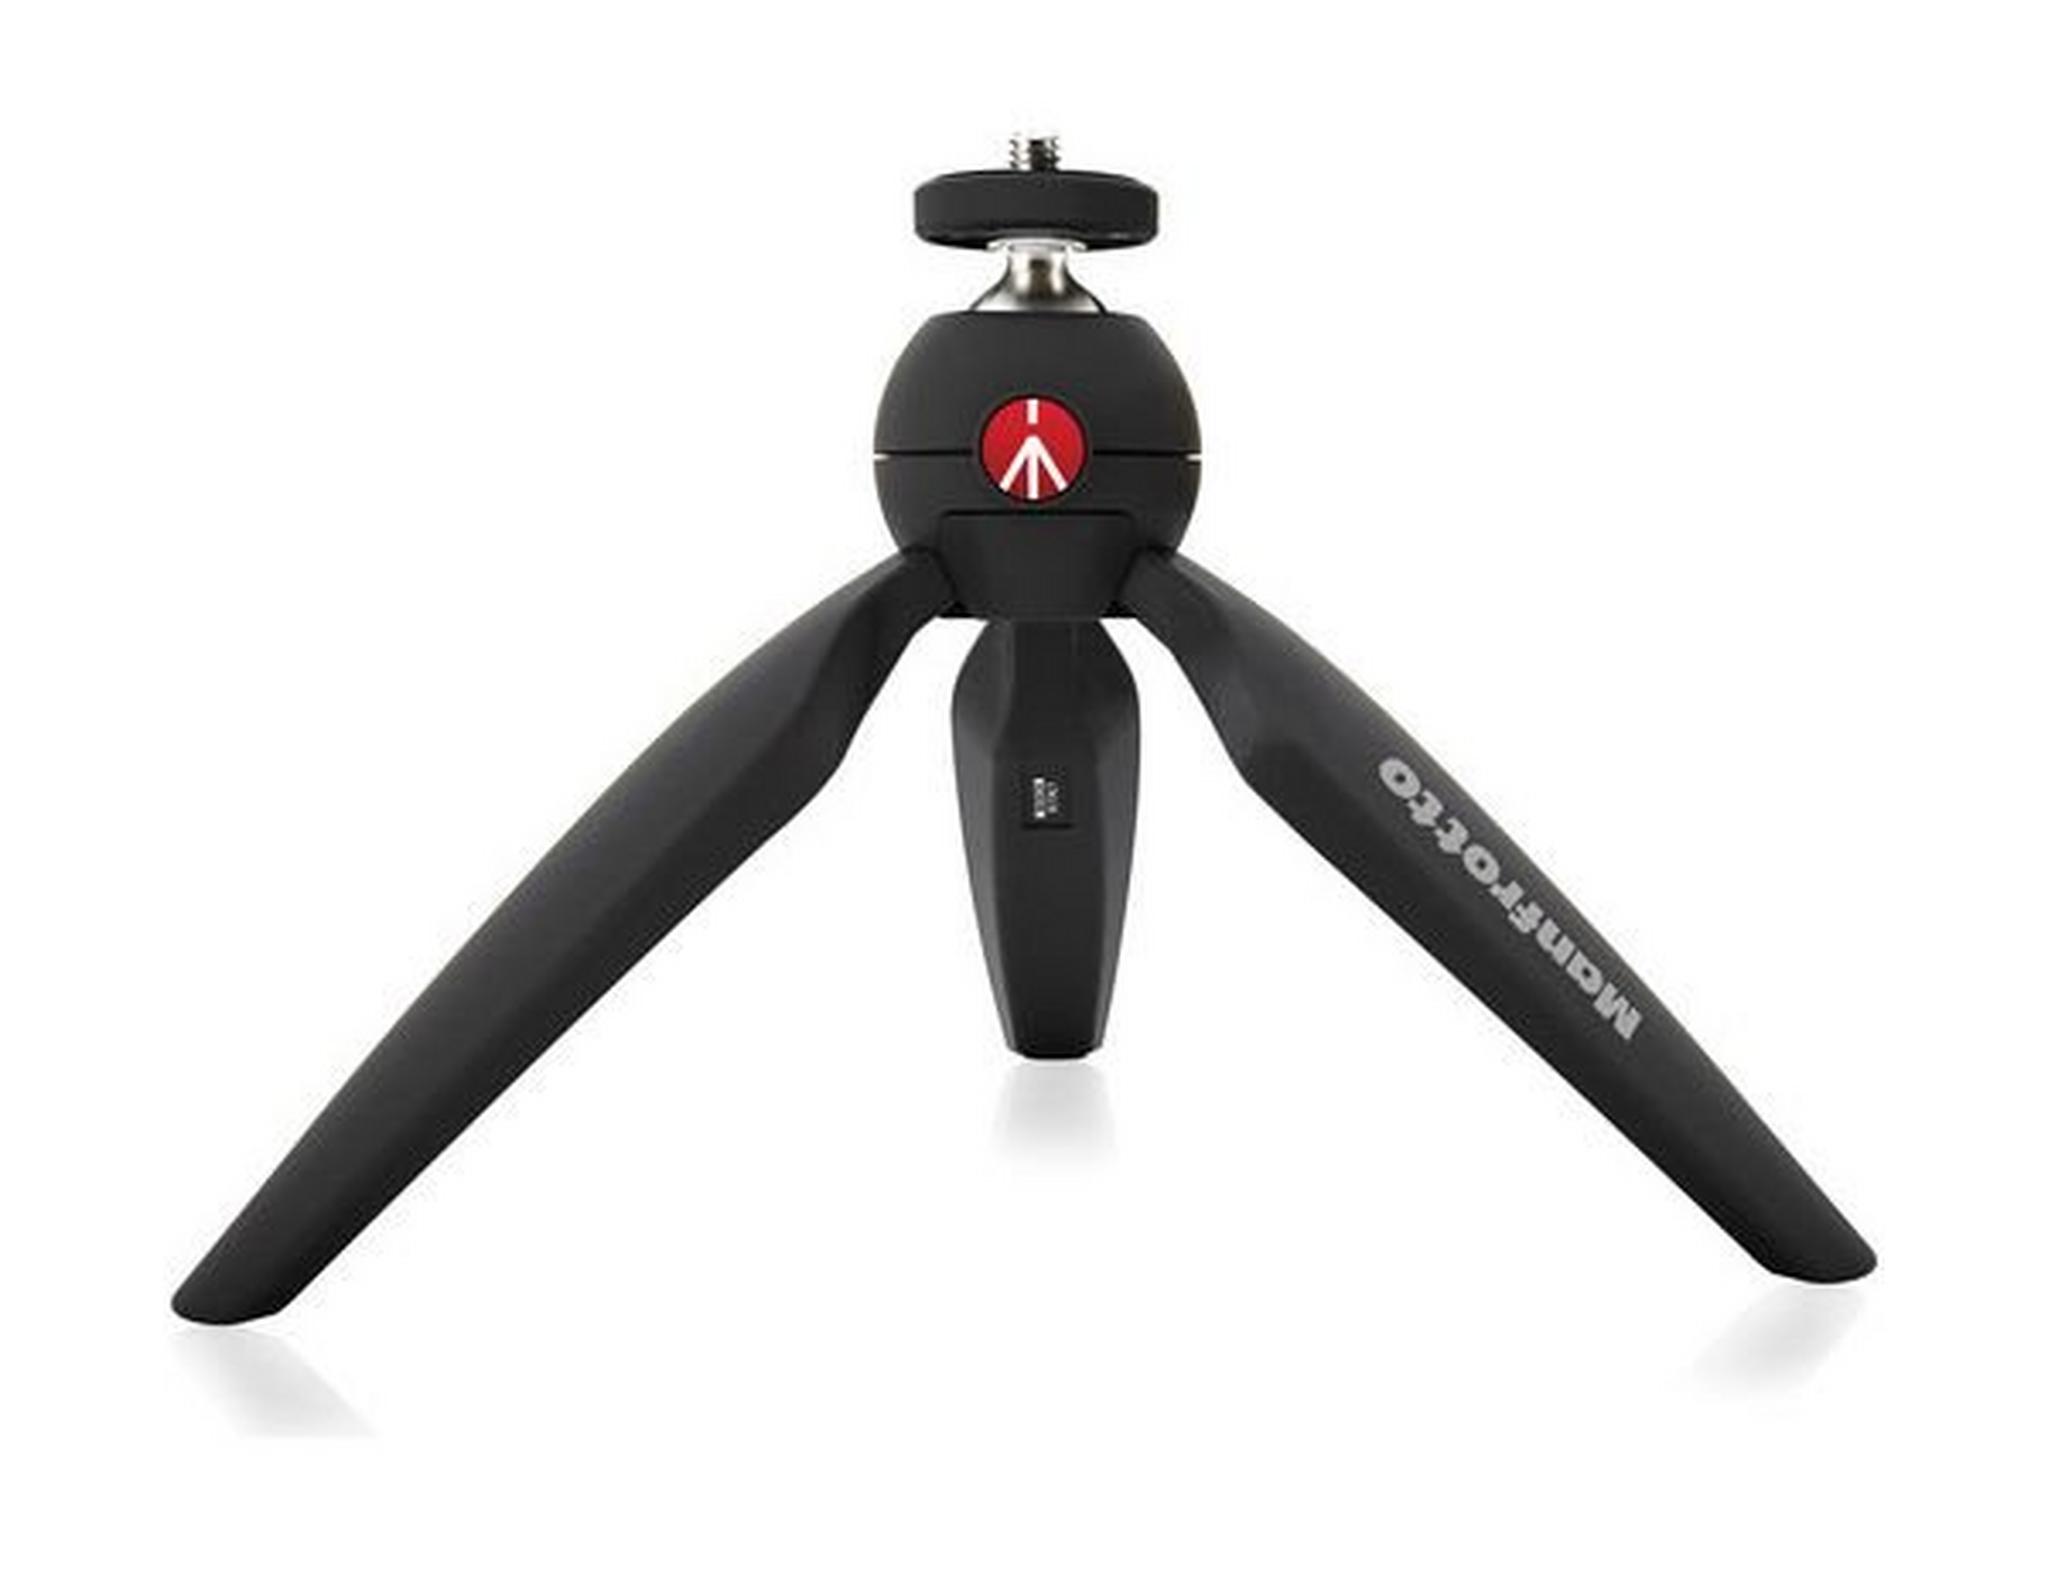 Manfrotto PIXI Mini Table Top Tripod With Universal Smartphone Clamp